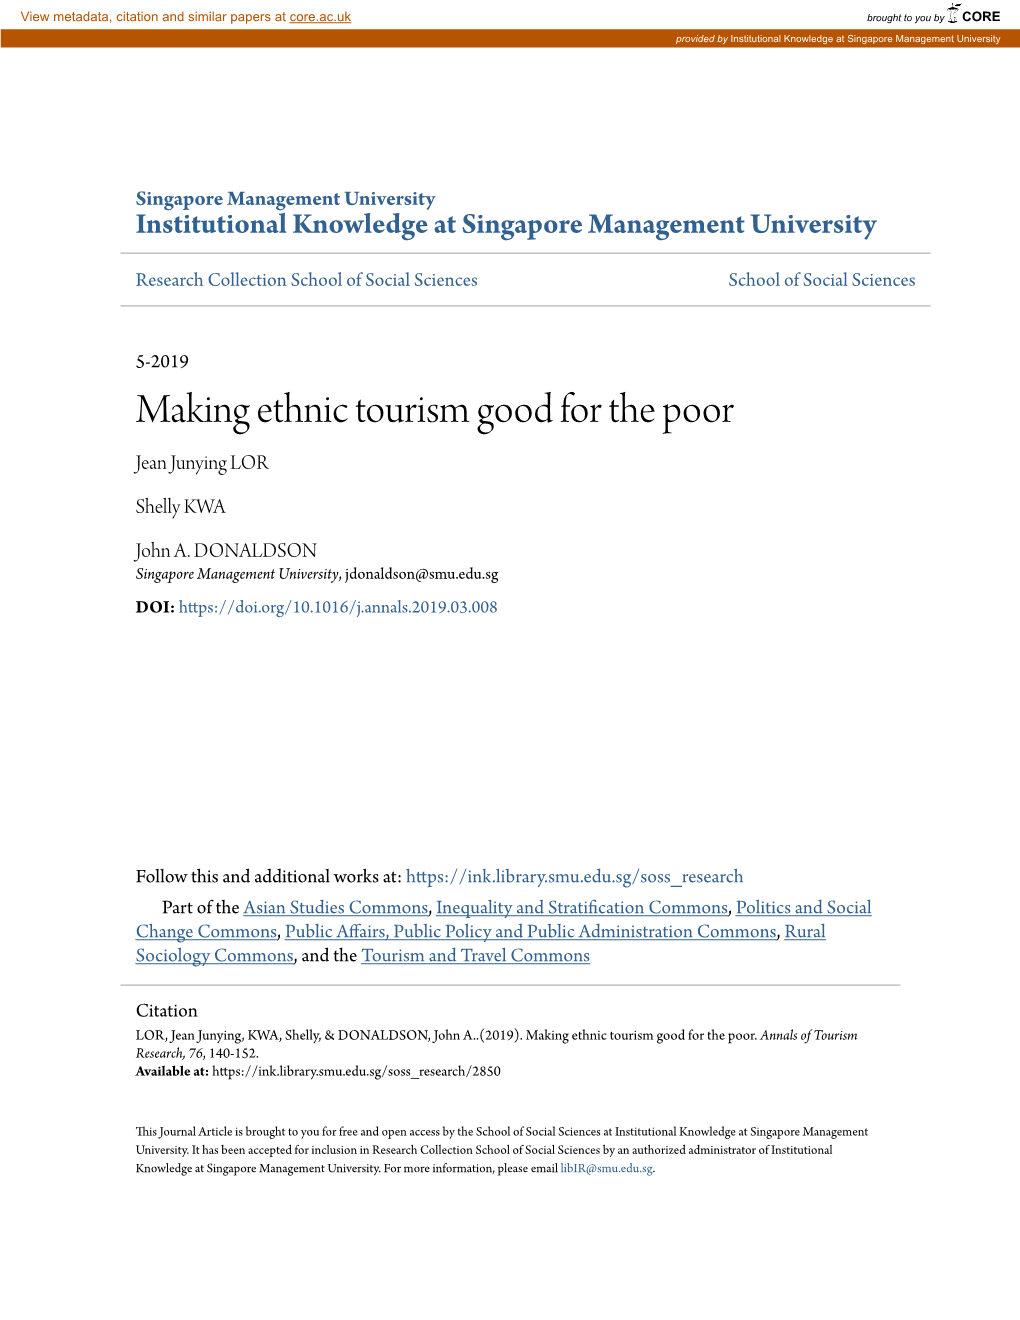 Making Ethnic Tourism Good for the Poor Jean Junying LOR